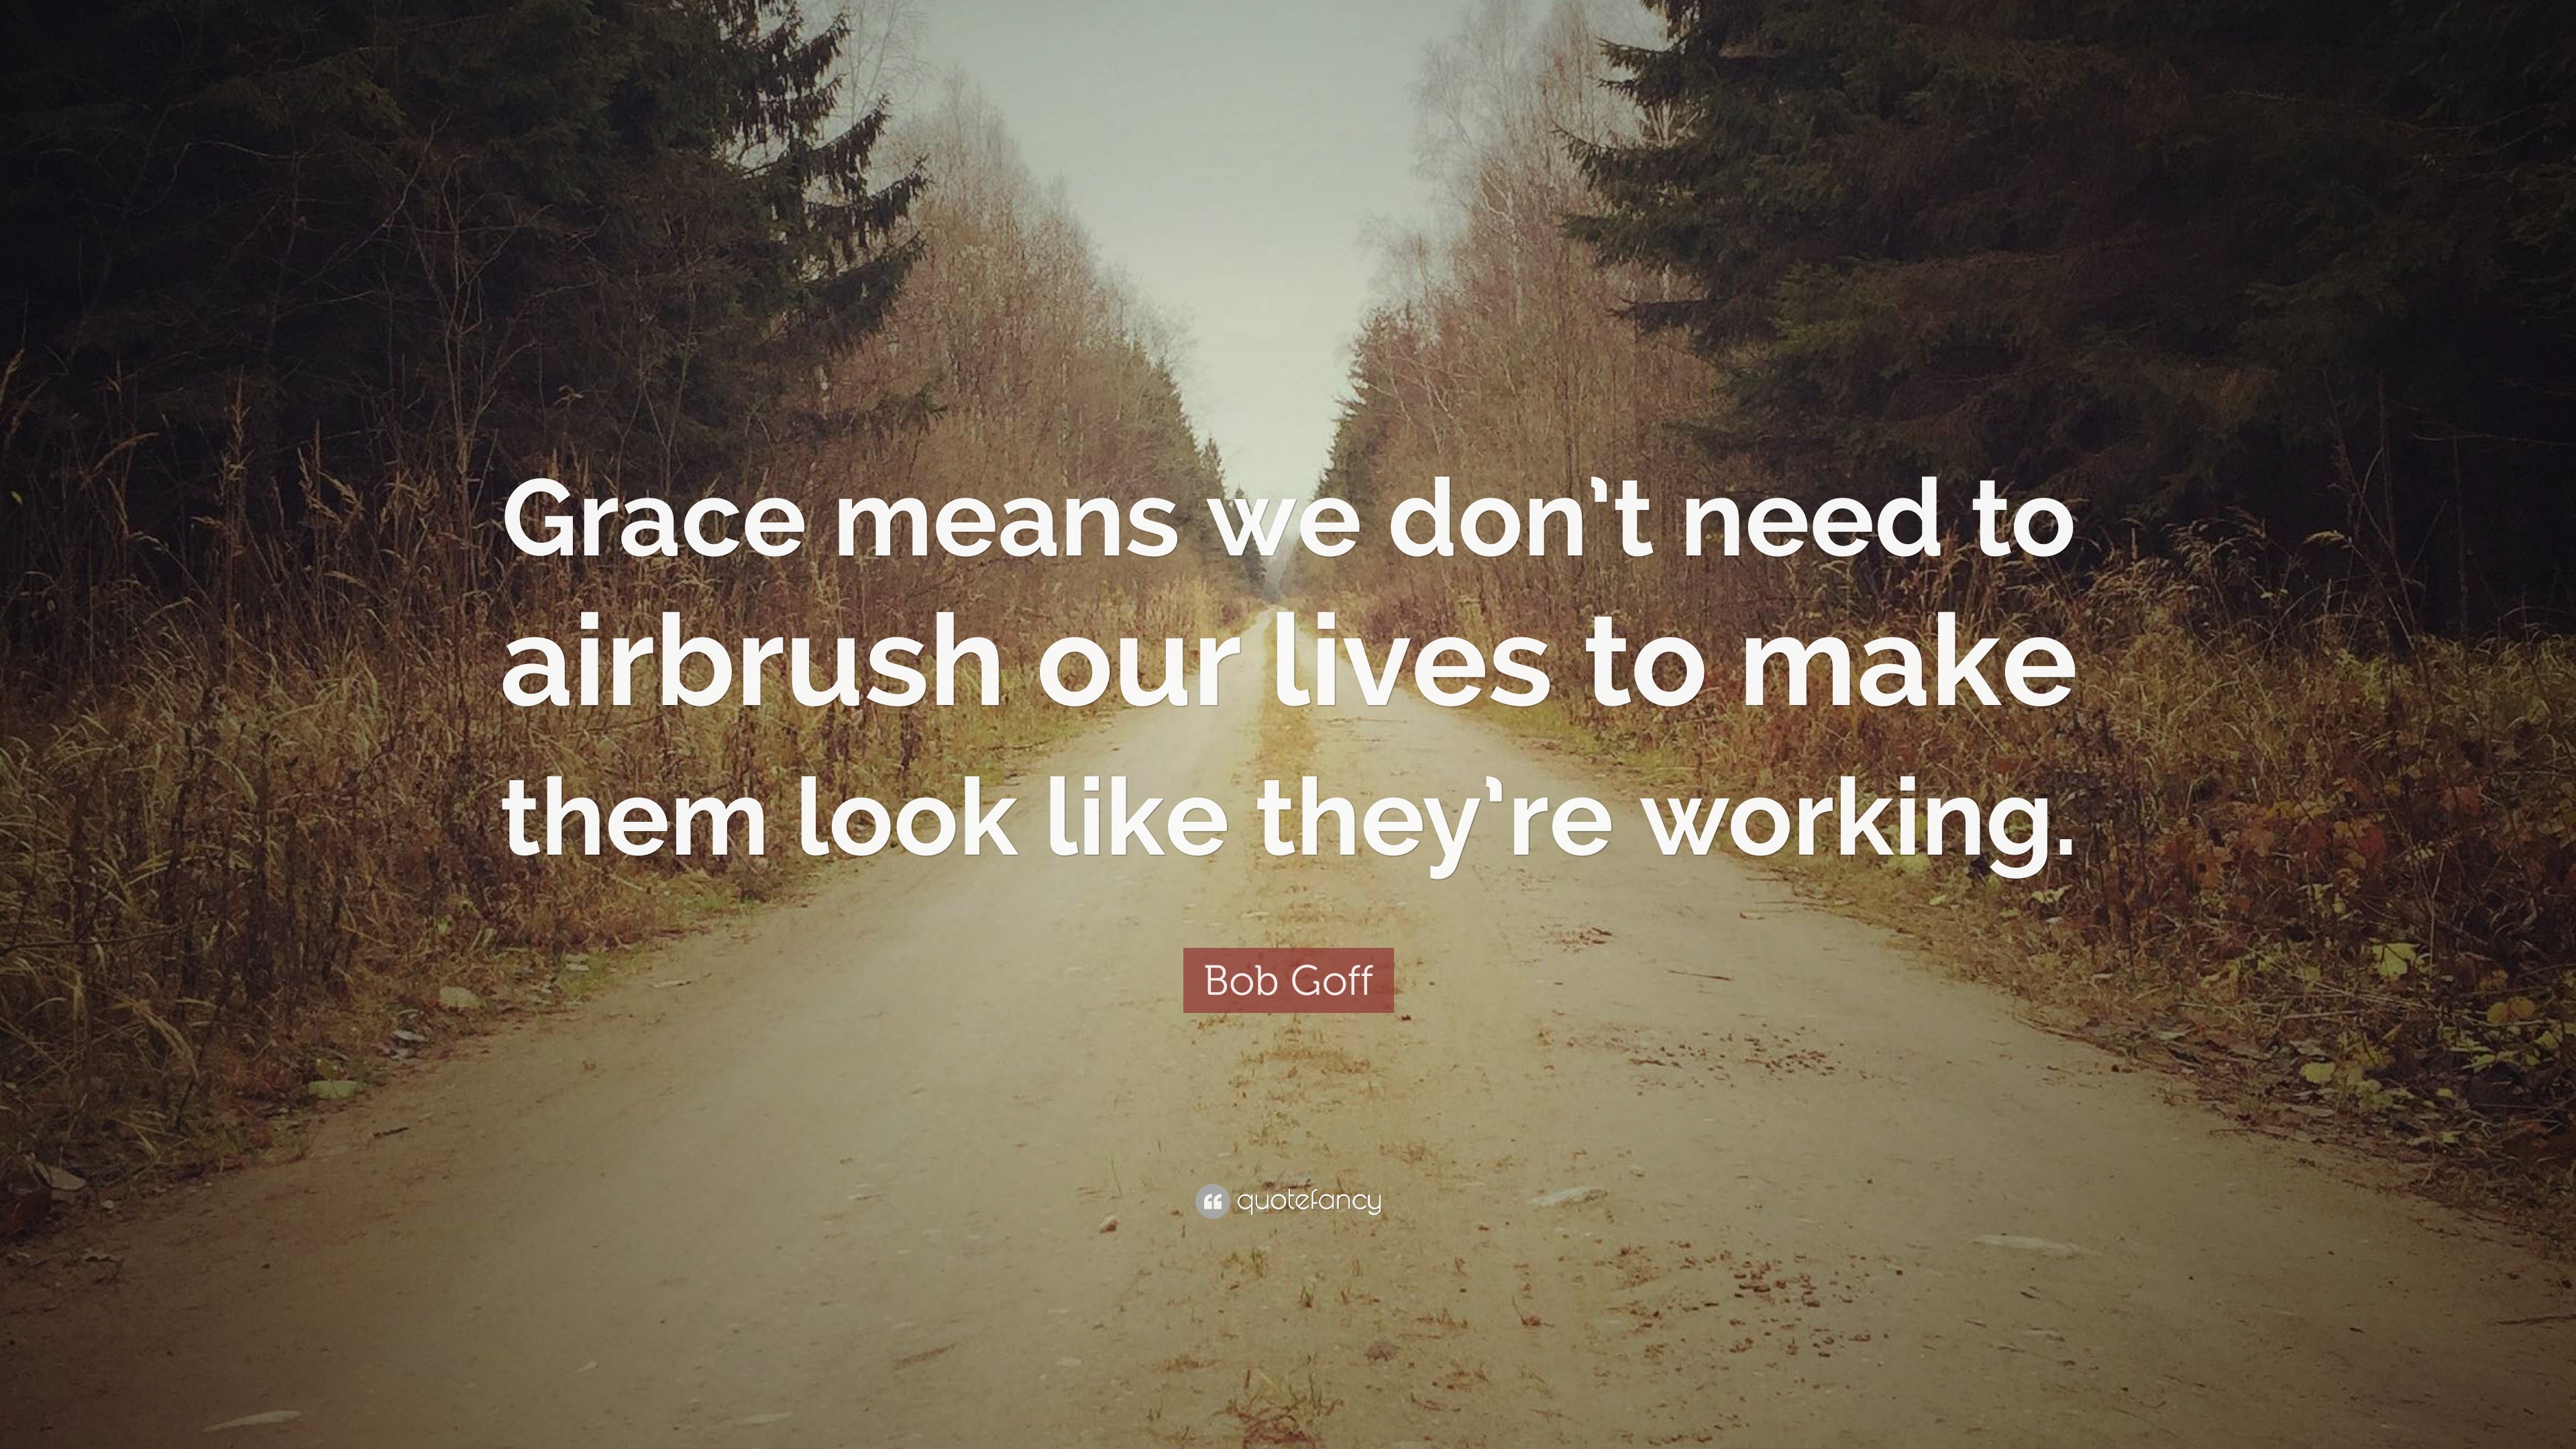 Bob Goff Quote: “Grace means we don't need to airbrush our lives